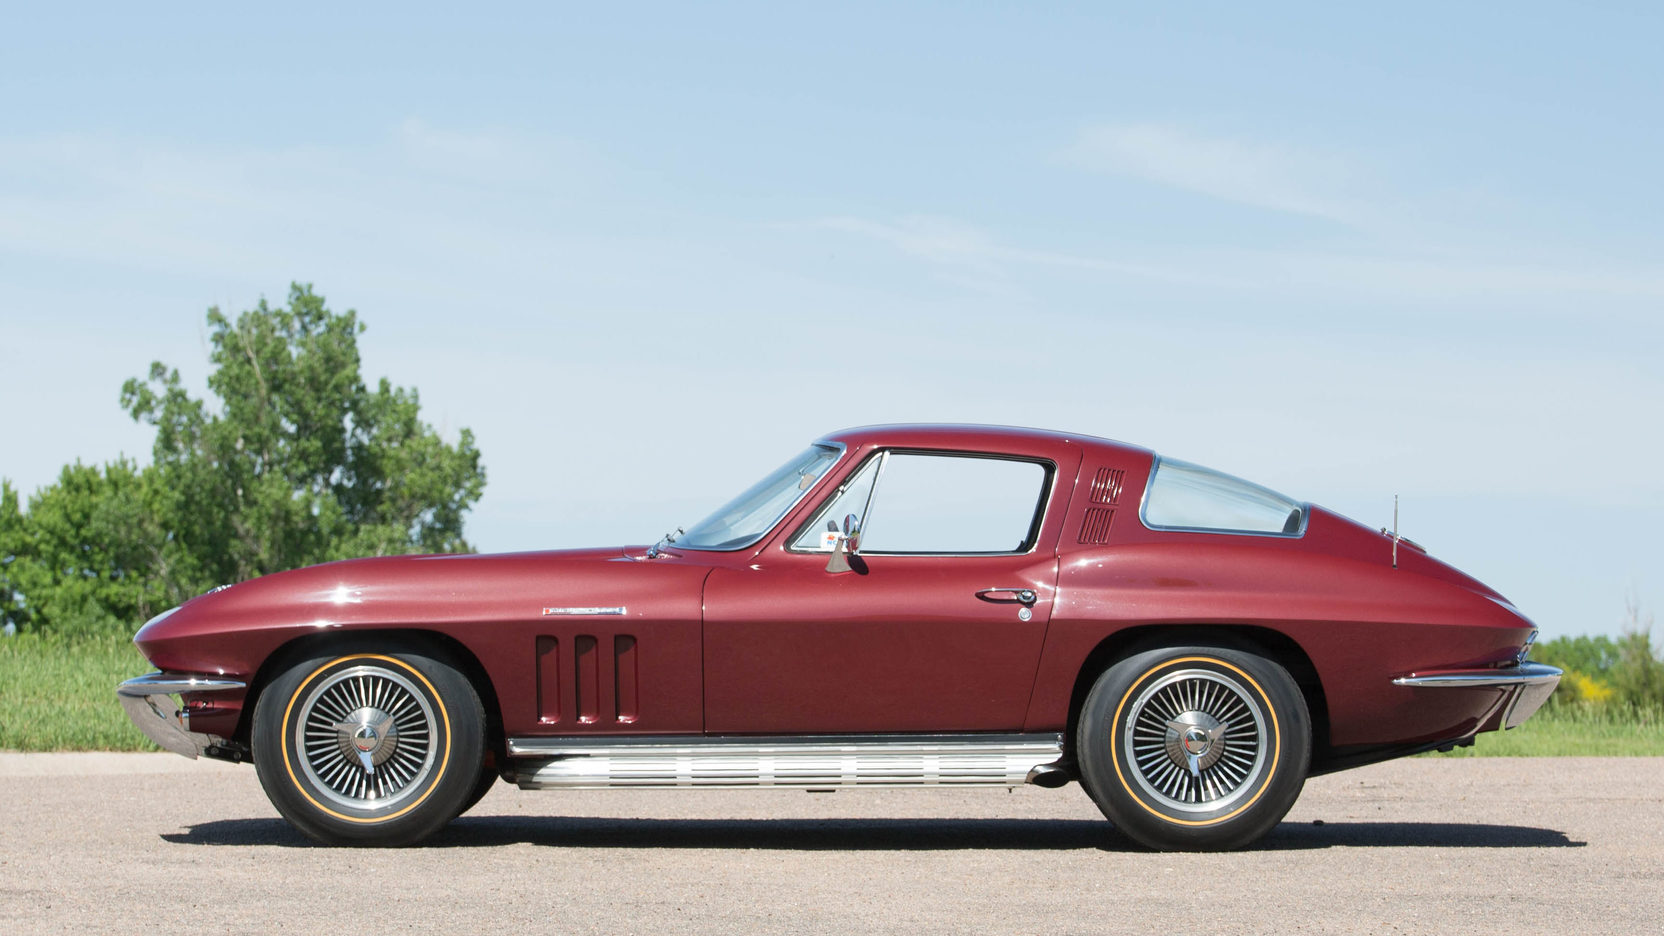 By the 1965 model year the Corvette Sting Ray's styling had been refined and the car's brakes were also improved.